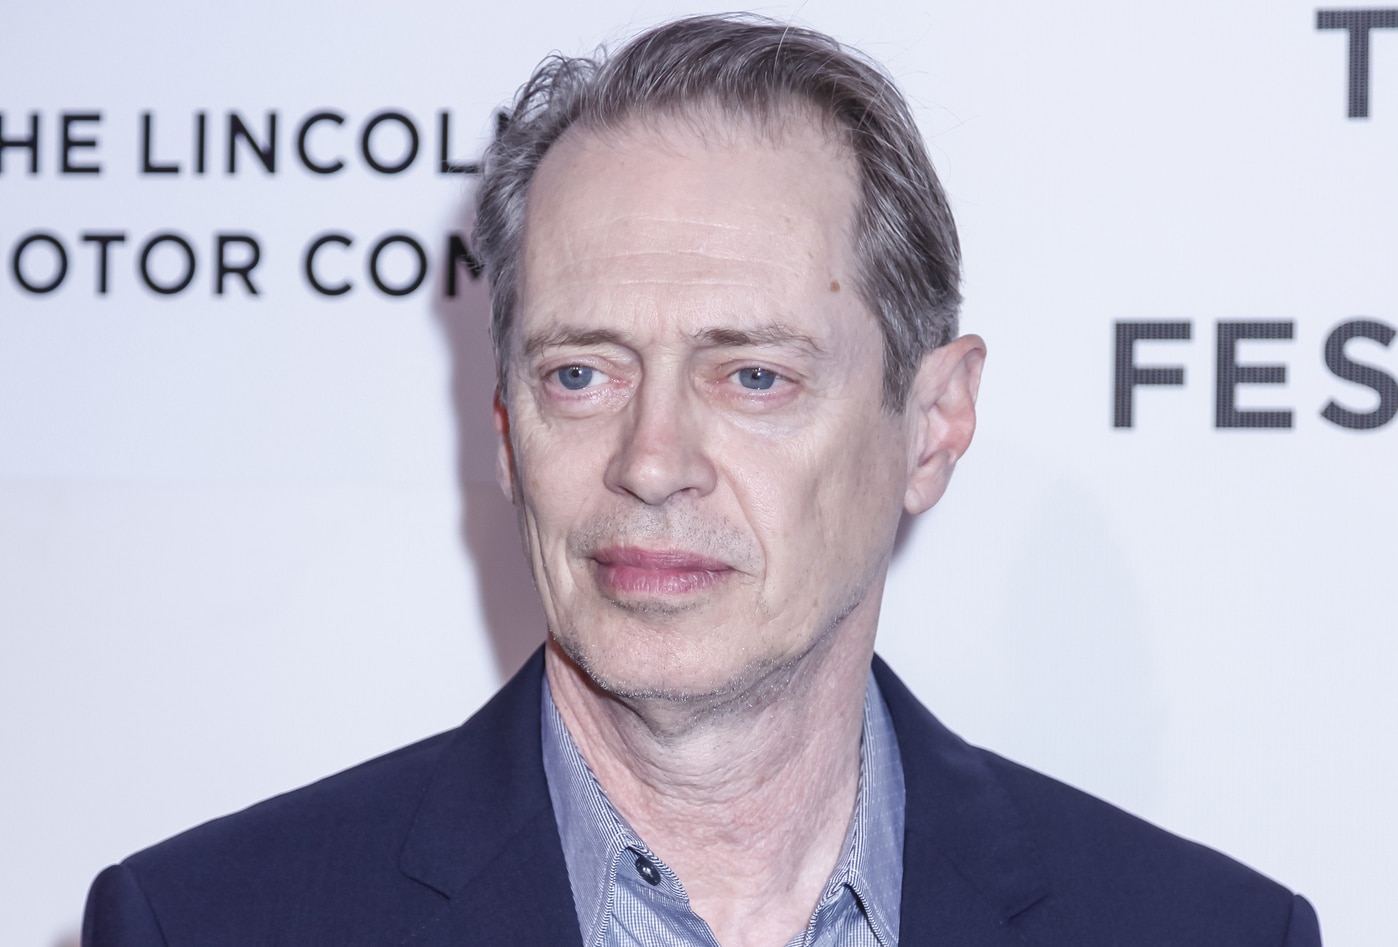 Renowned actor Steve Buscemi survives unprovoked assault in NYC